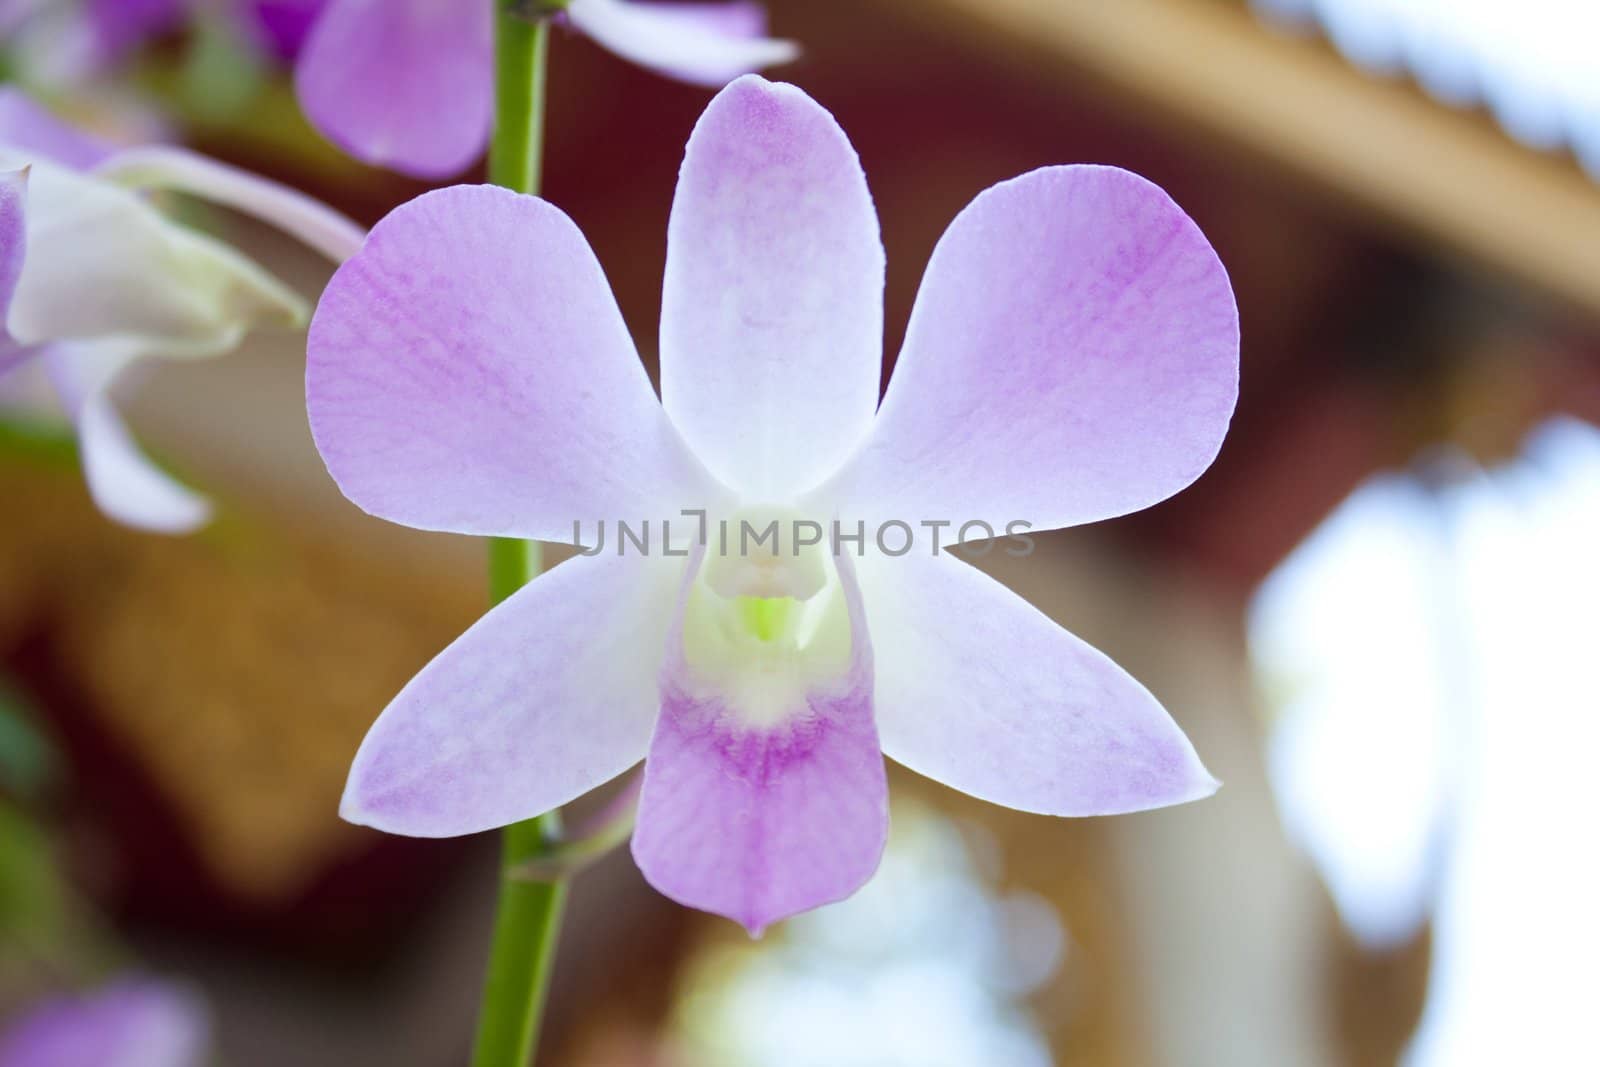 Light Blue Orchid. Light blue orchid bouquet. Orchids that have fresh and clean look.
